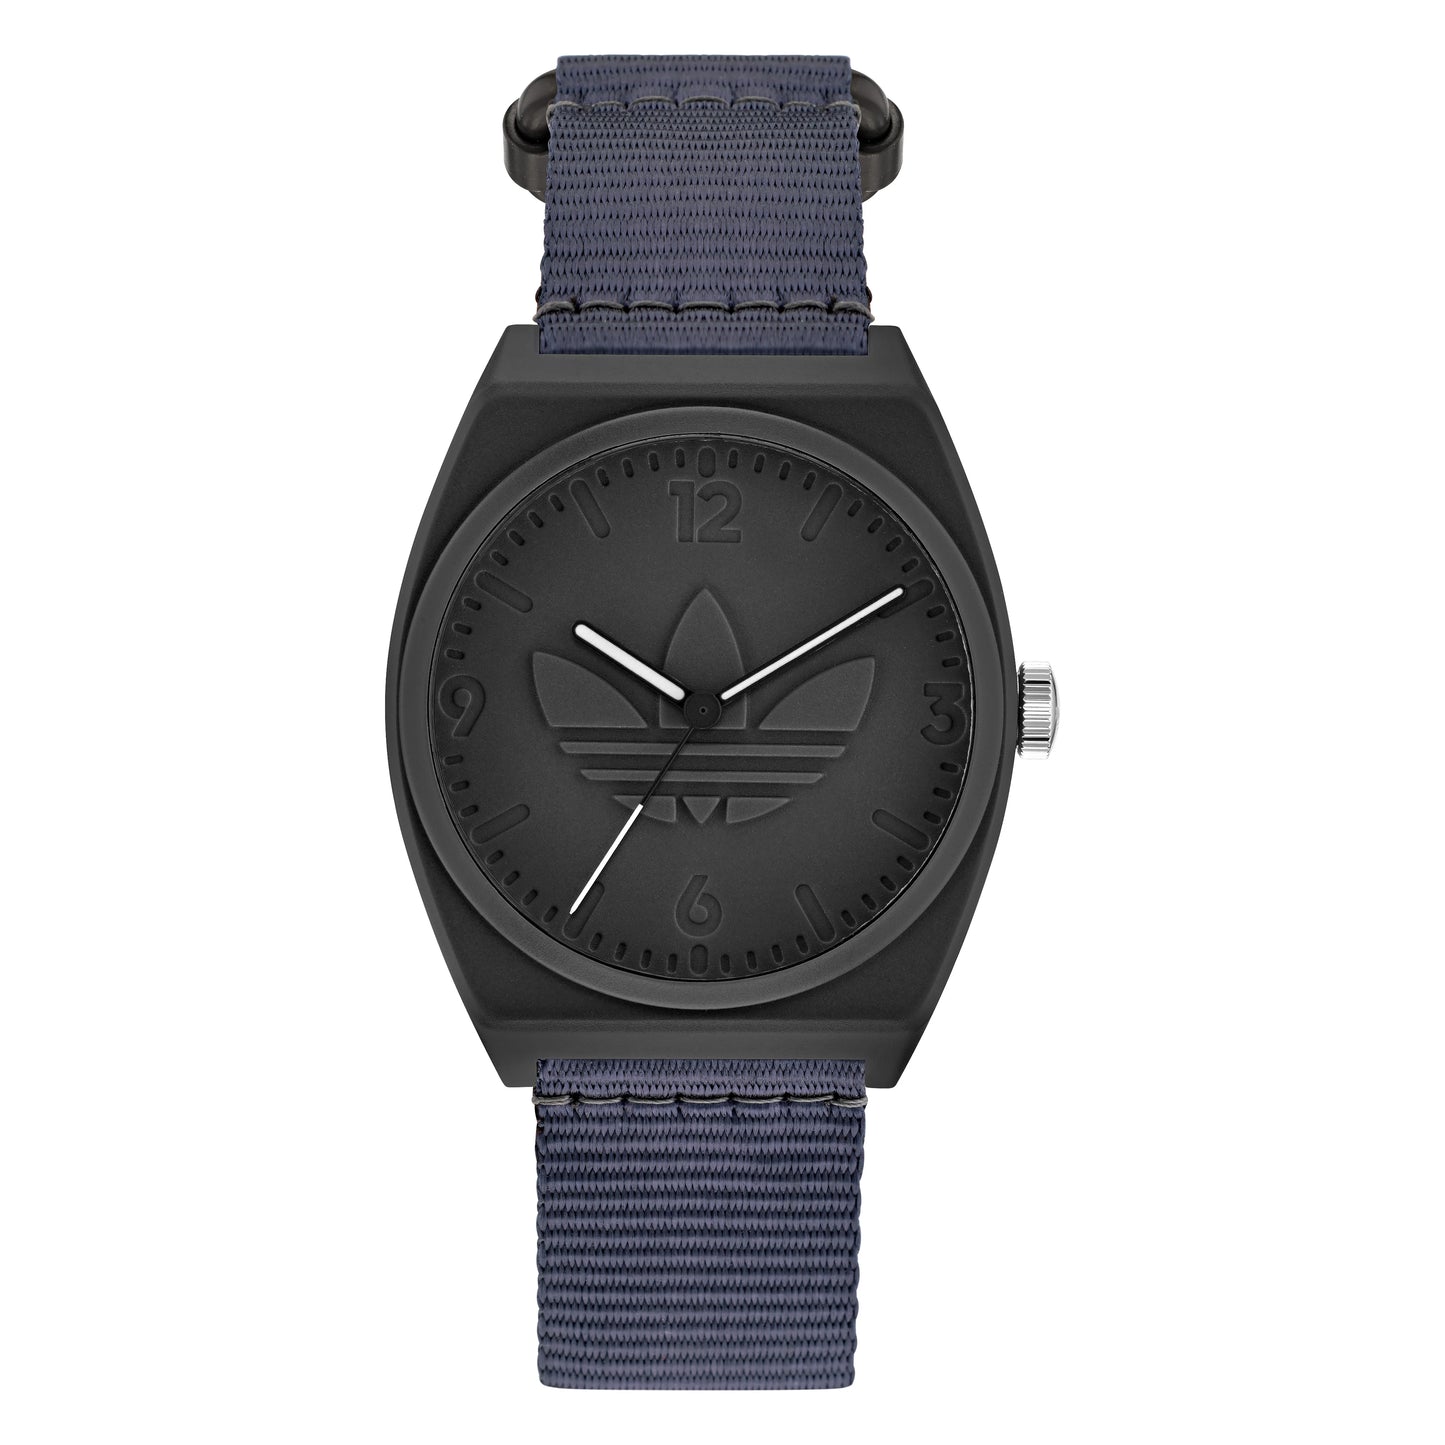 Project One Unisex Watch